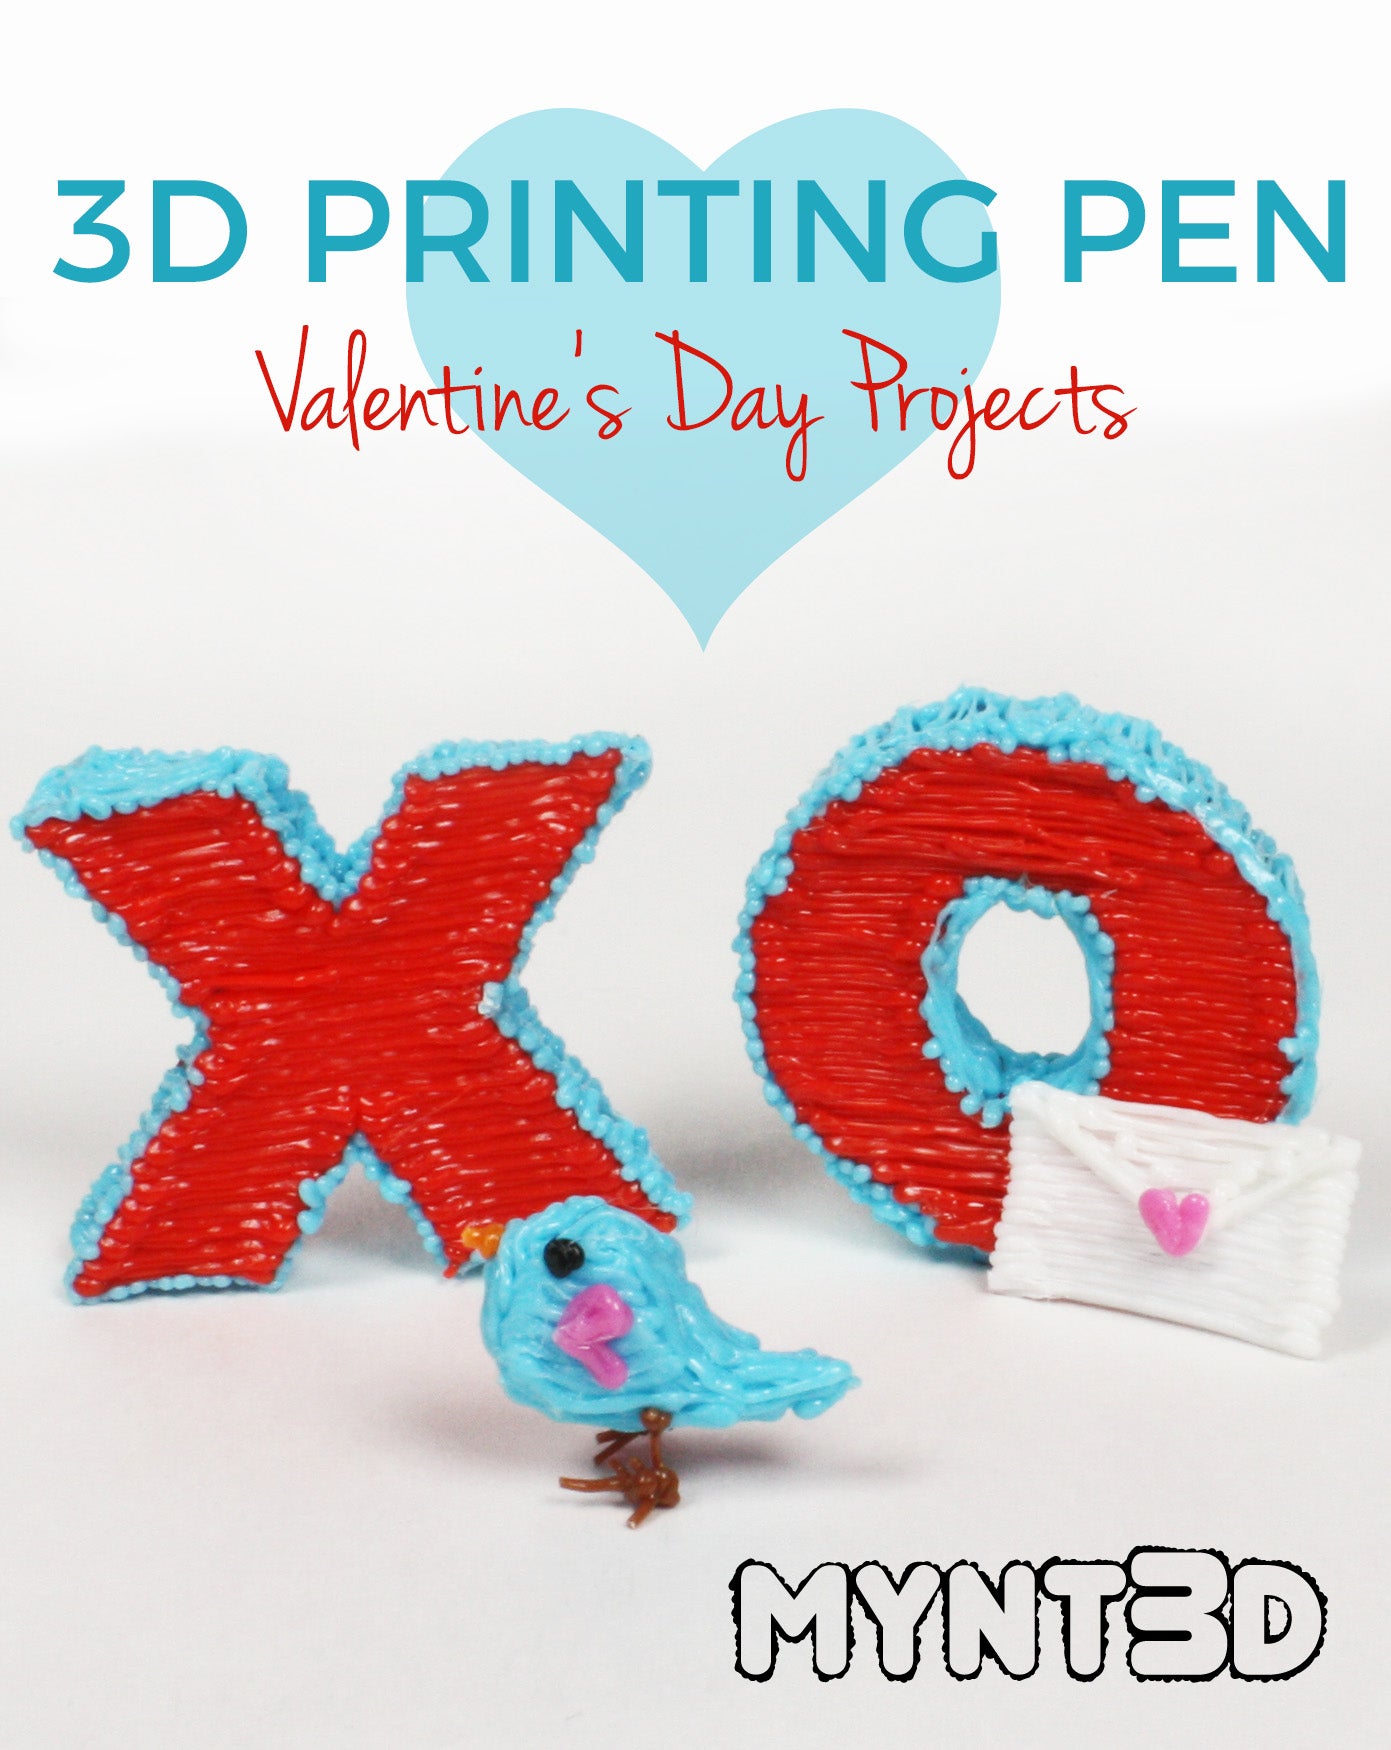 4 Valentine's Day Projects to Make with a 3D Pen - MYNT3D